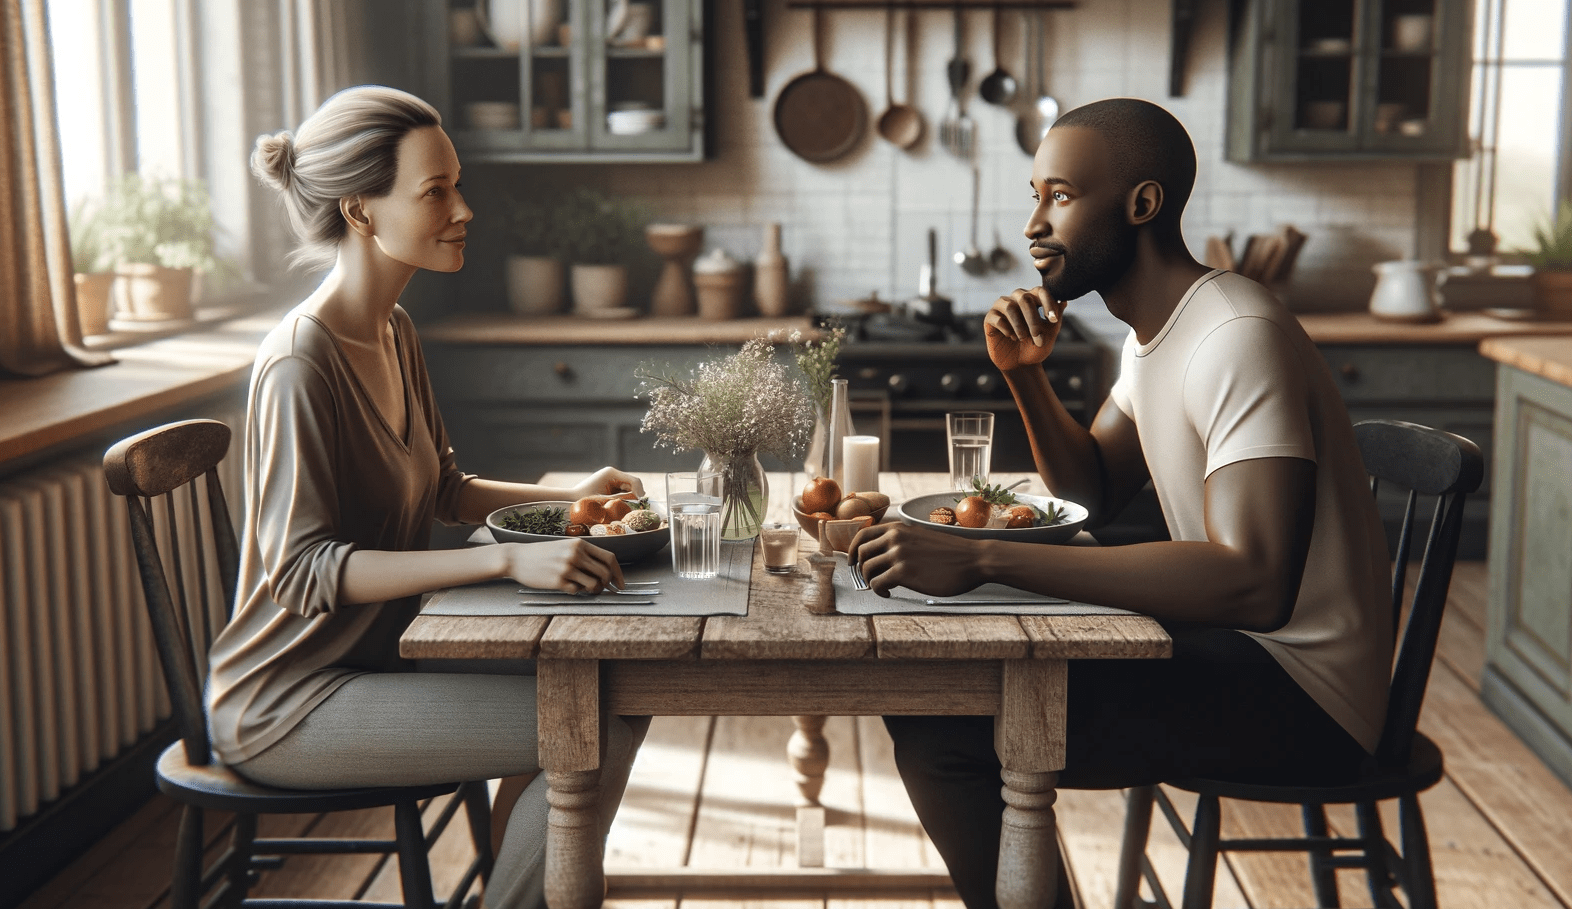 Tips for Making the Most of Your 10-Month Relationship